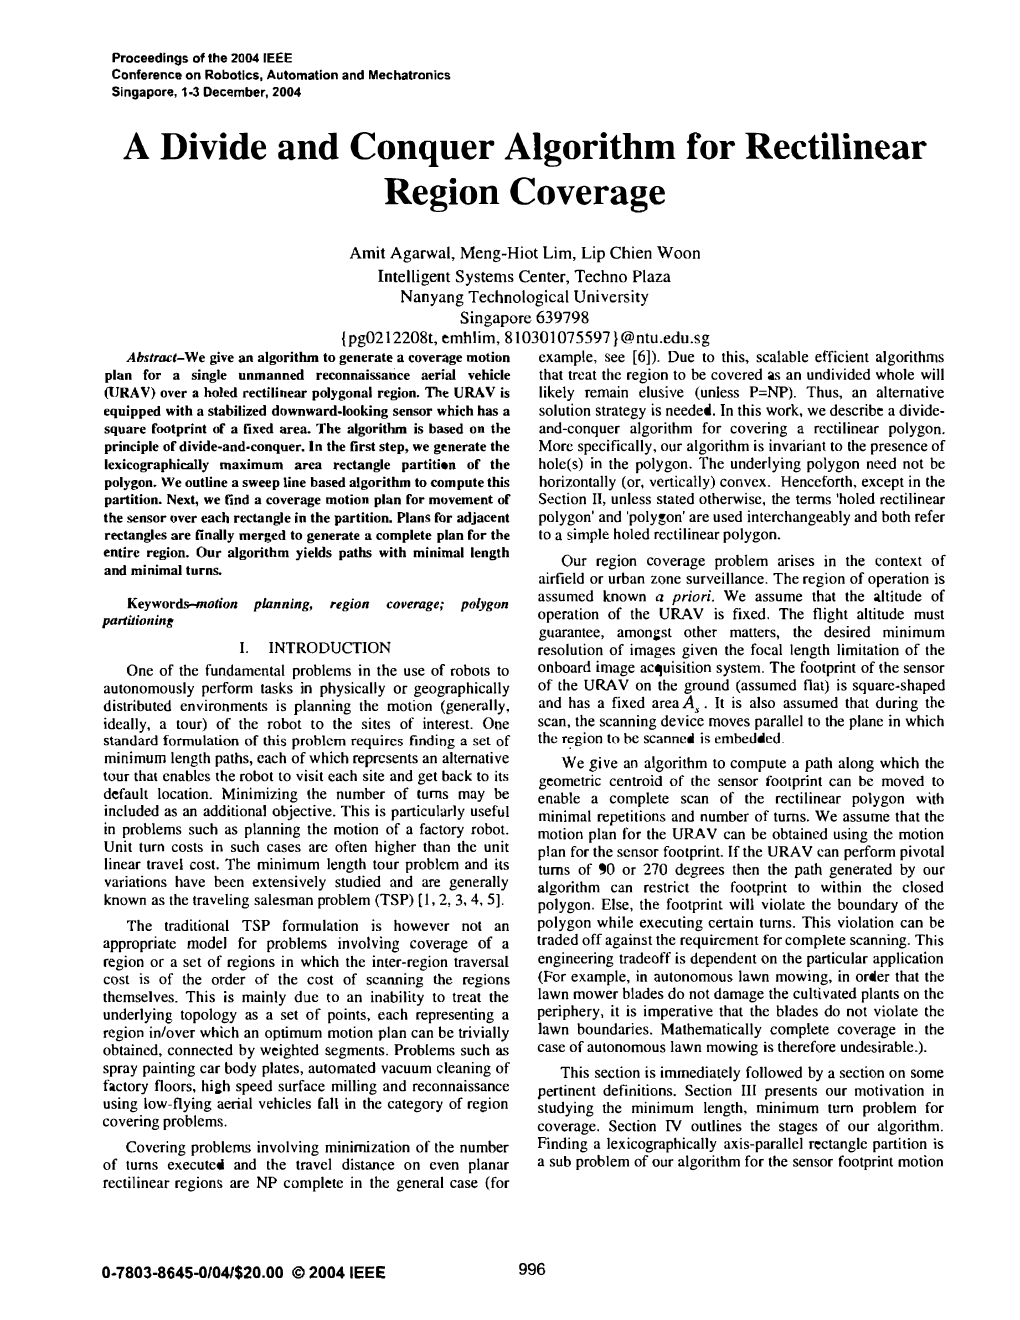 A Divide and Conquer Algorithm for Rectilinear Region Coverage